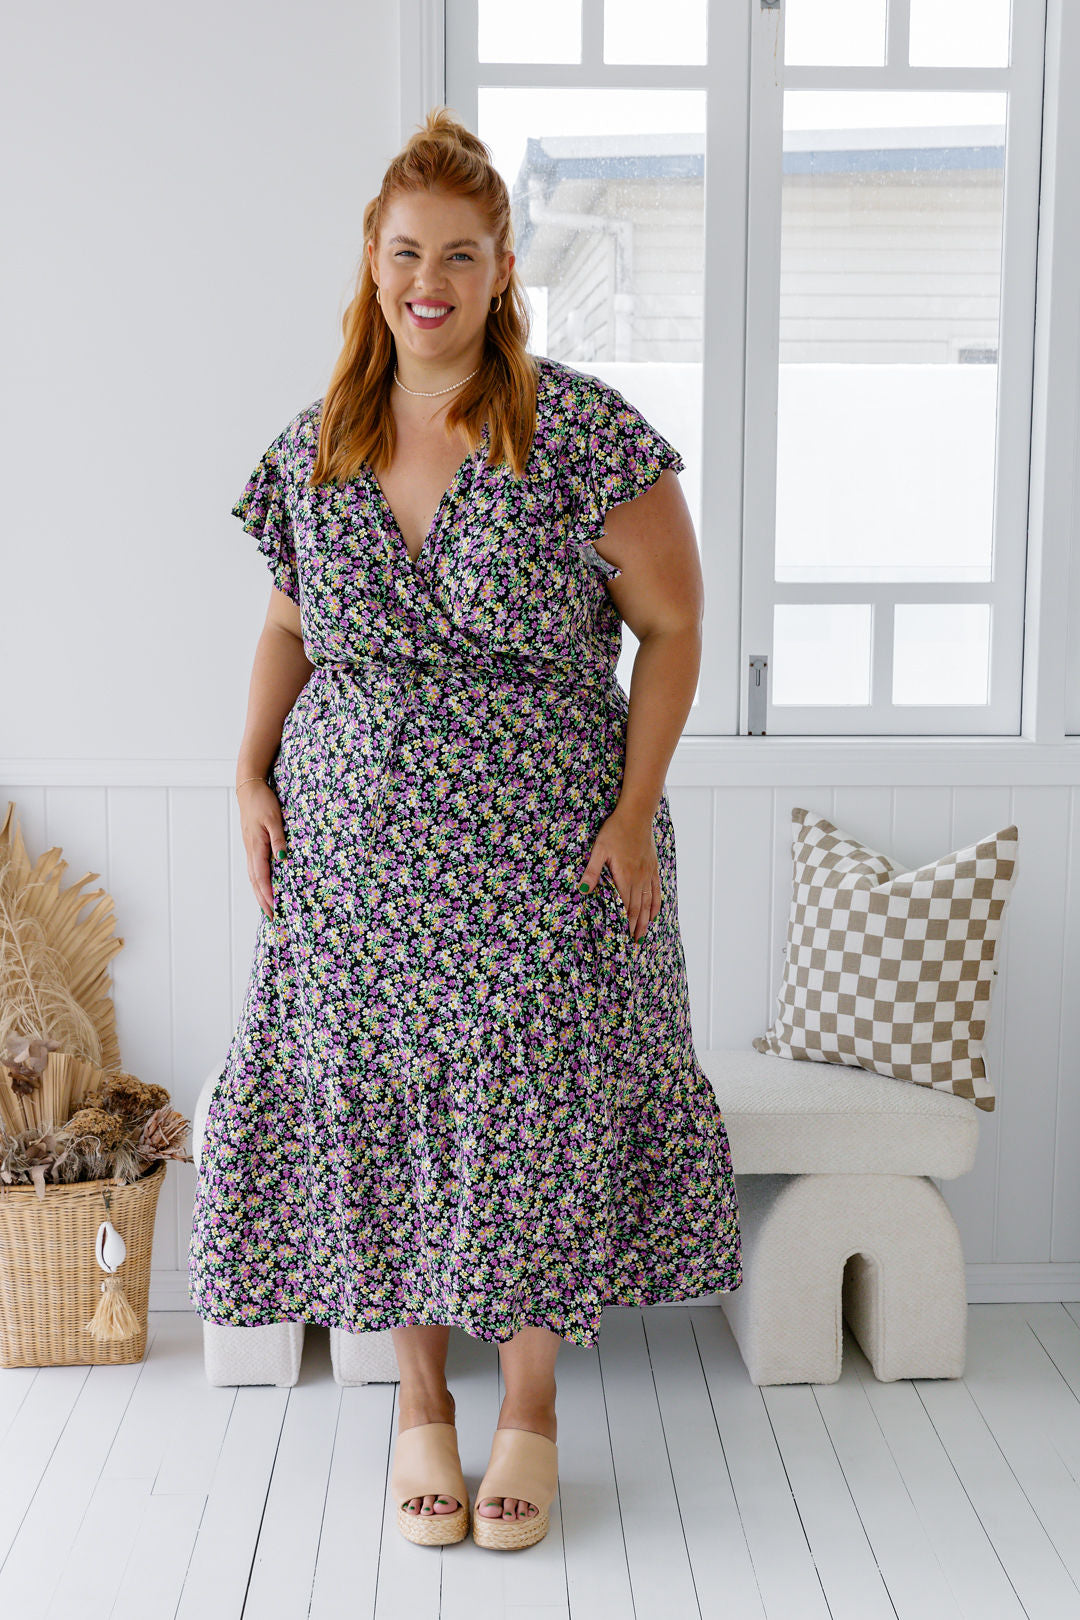 Honey Wrap Dress in Wisteria Floral Print